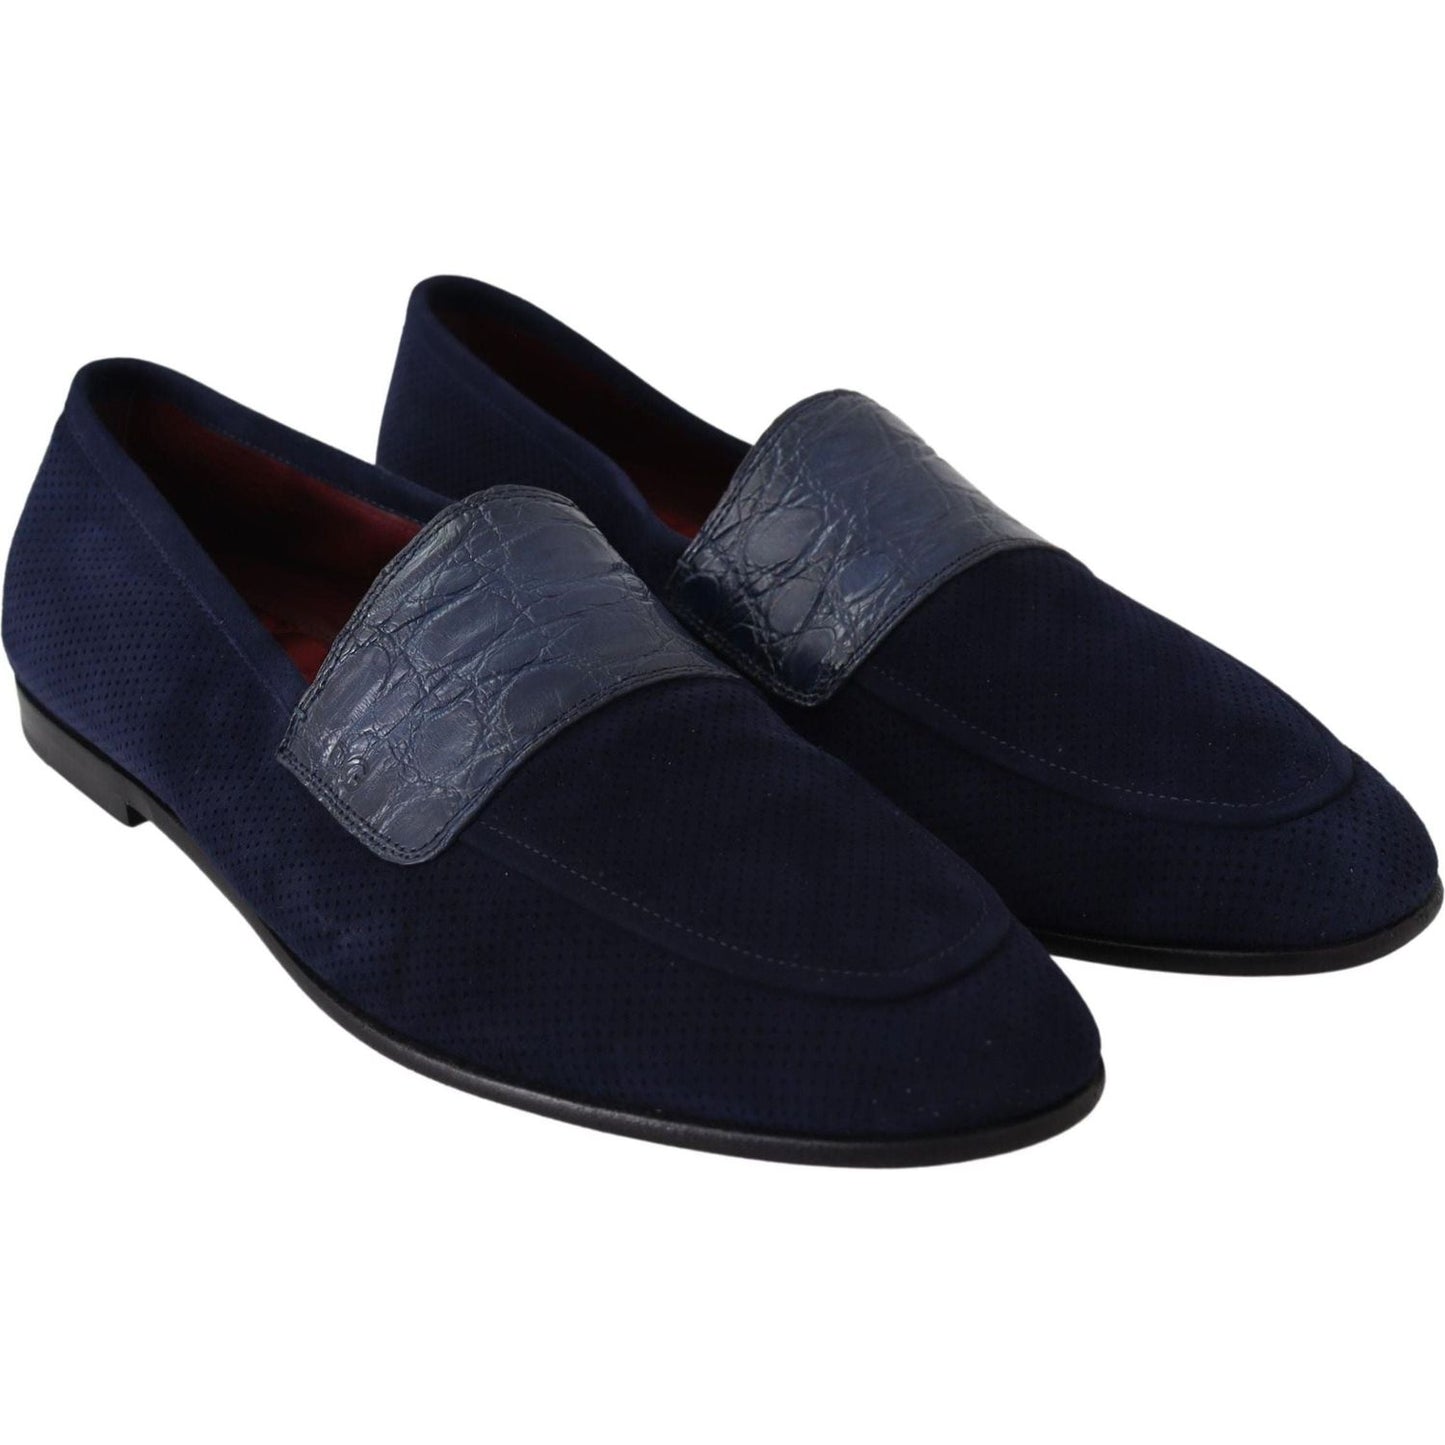 Dolce & Gabbana Elegant Blue Suede Leather Loafers blue-suede-caiman-loafers-slippers-shoes IMG_1591-580161d9-fd5.jpg